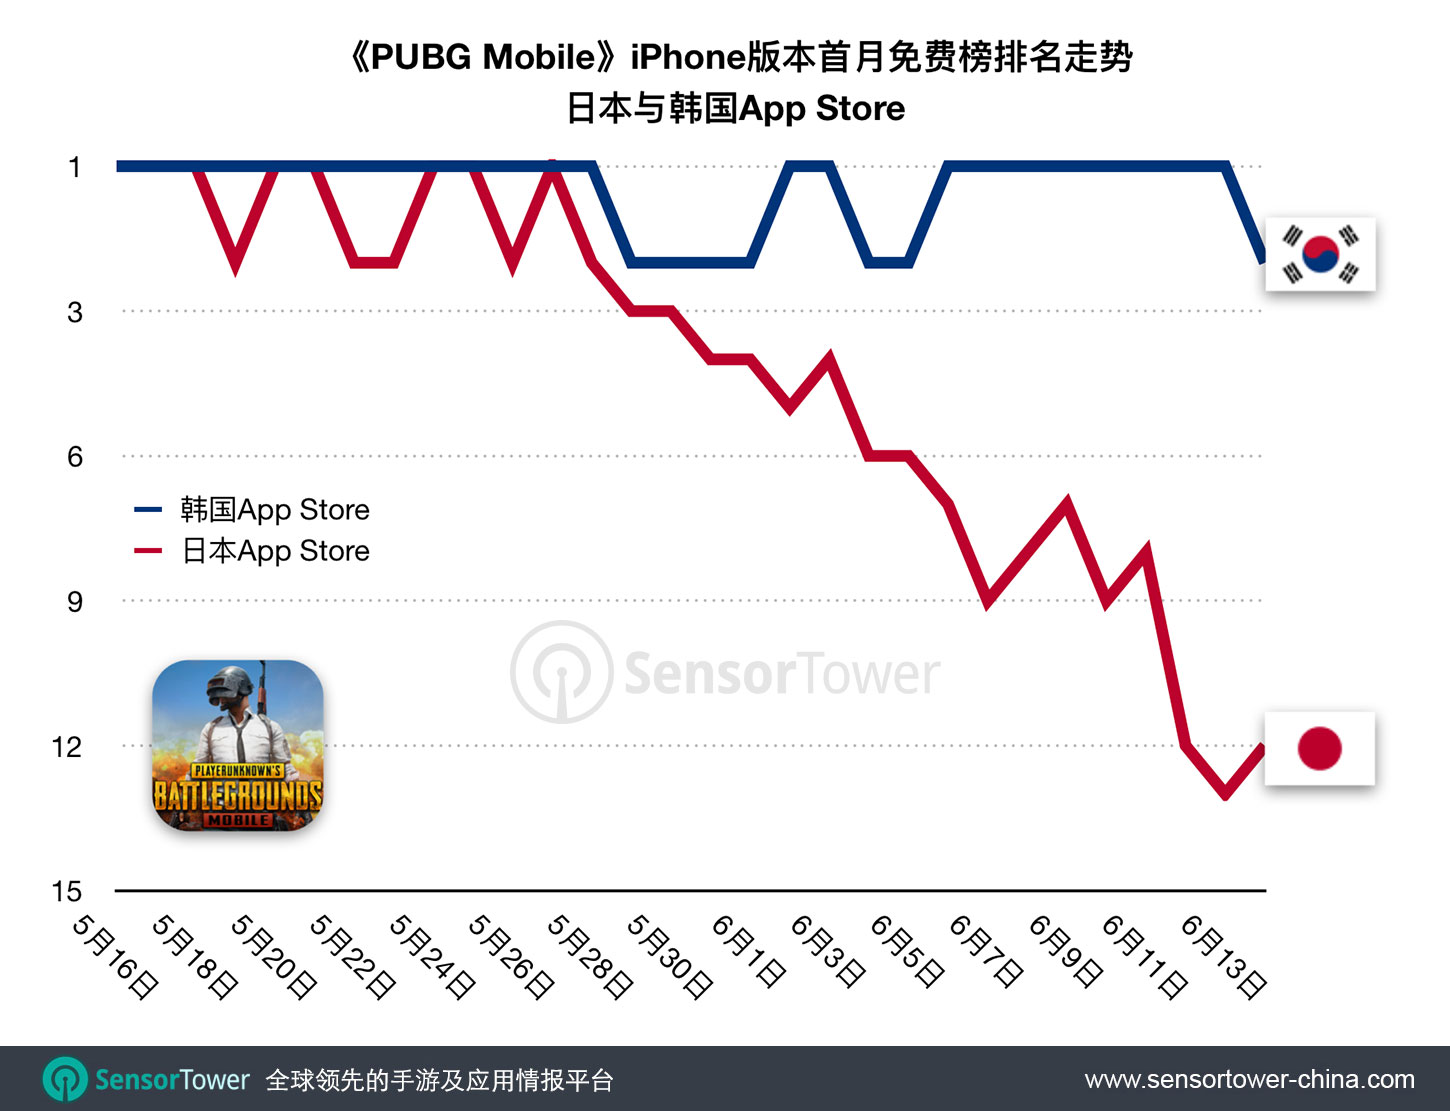 PUBG Mobile First 30-Day Download Category Rankings in Japan and Korea